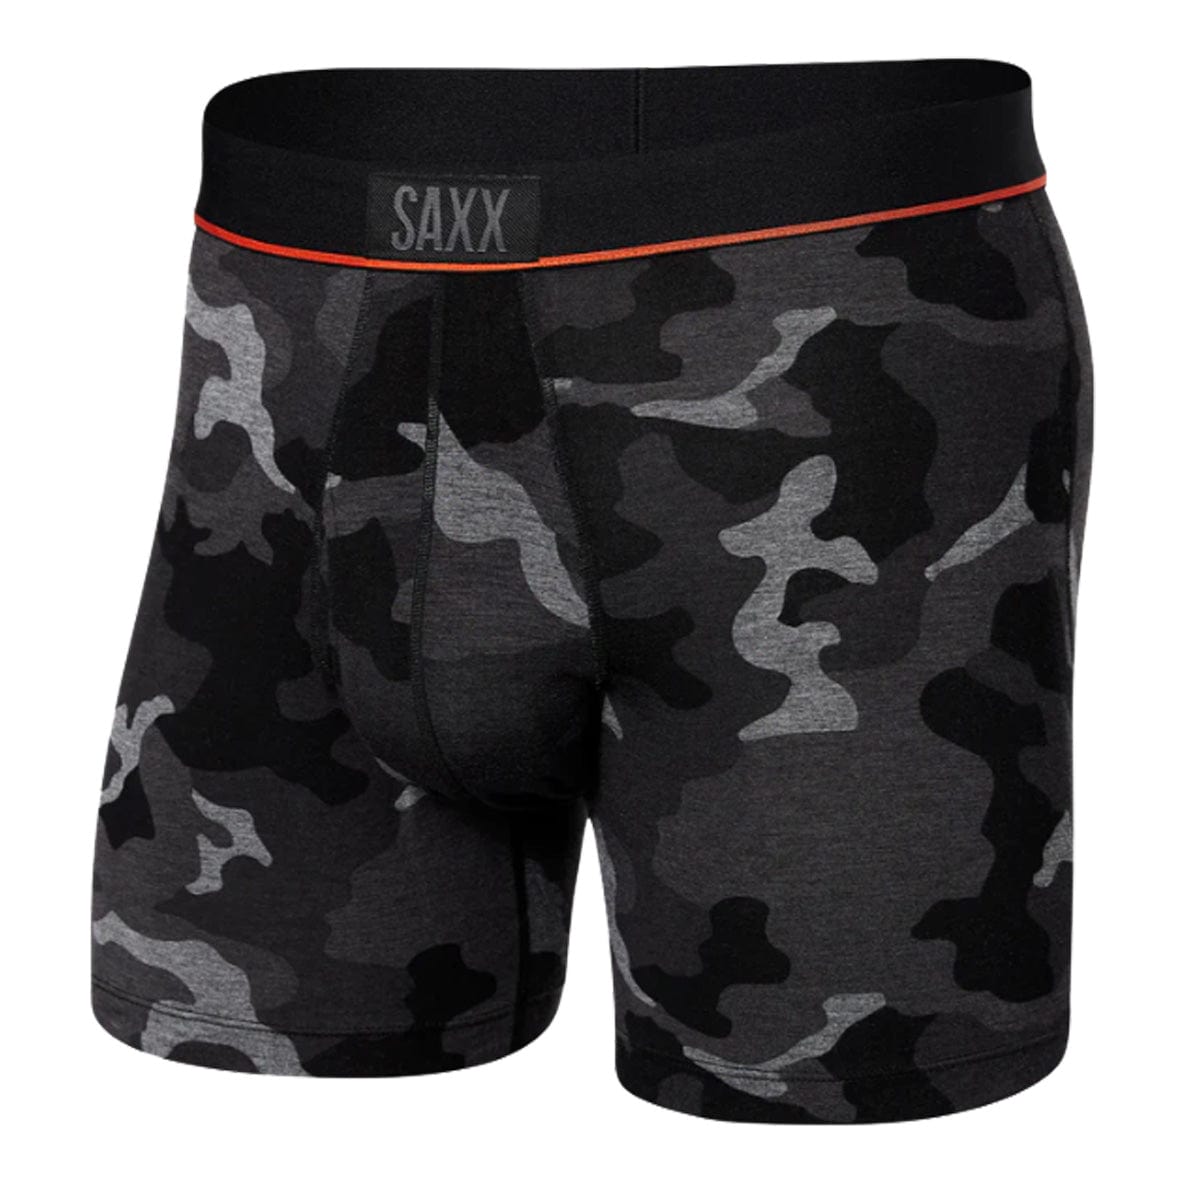 Saxx Ultra Boxers - Multi The Huddle Is Real